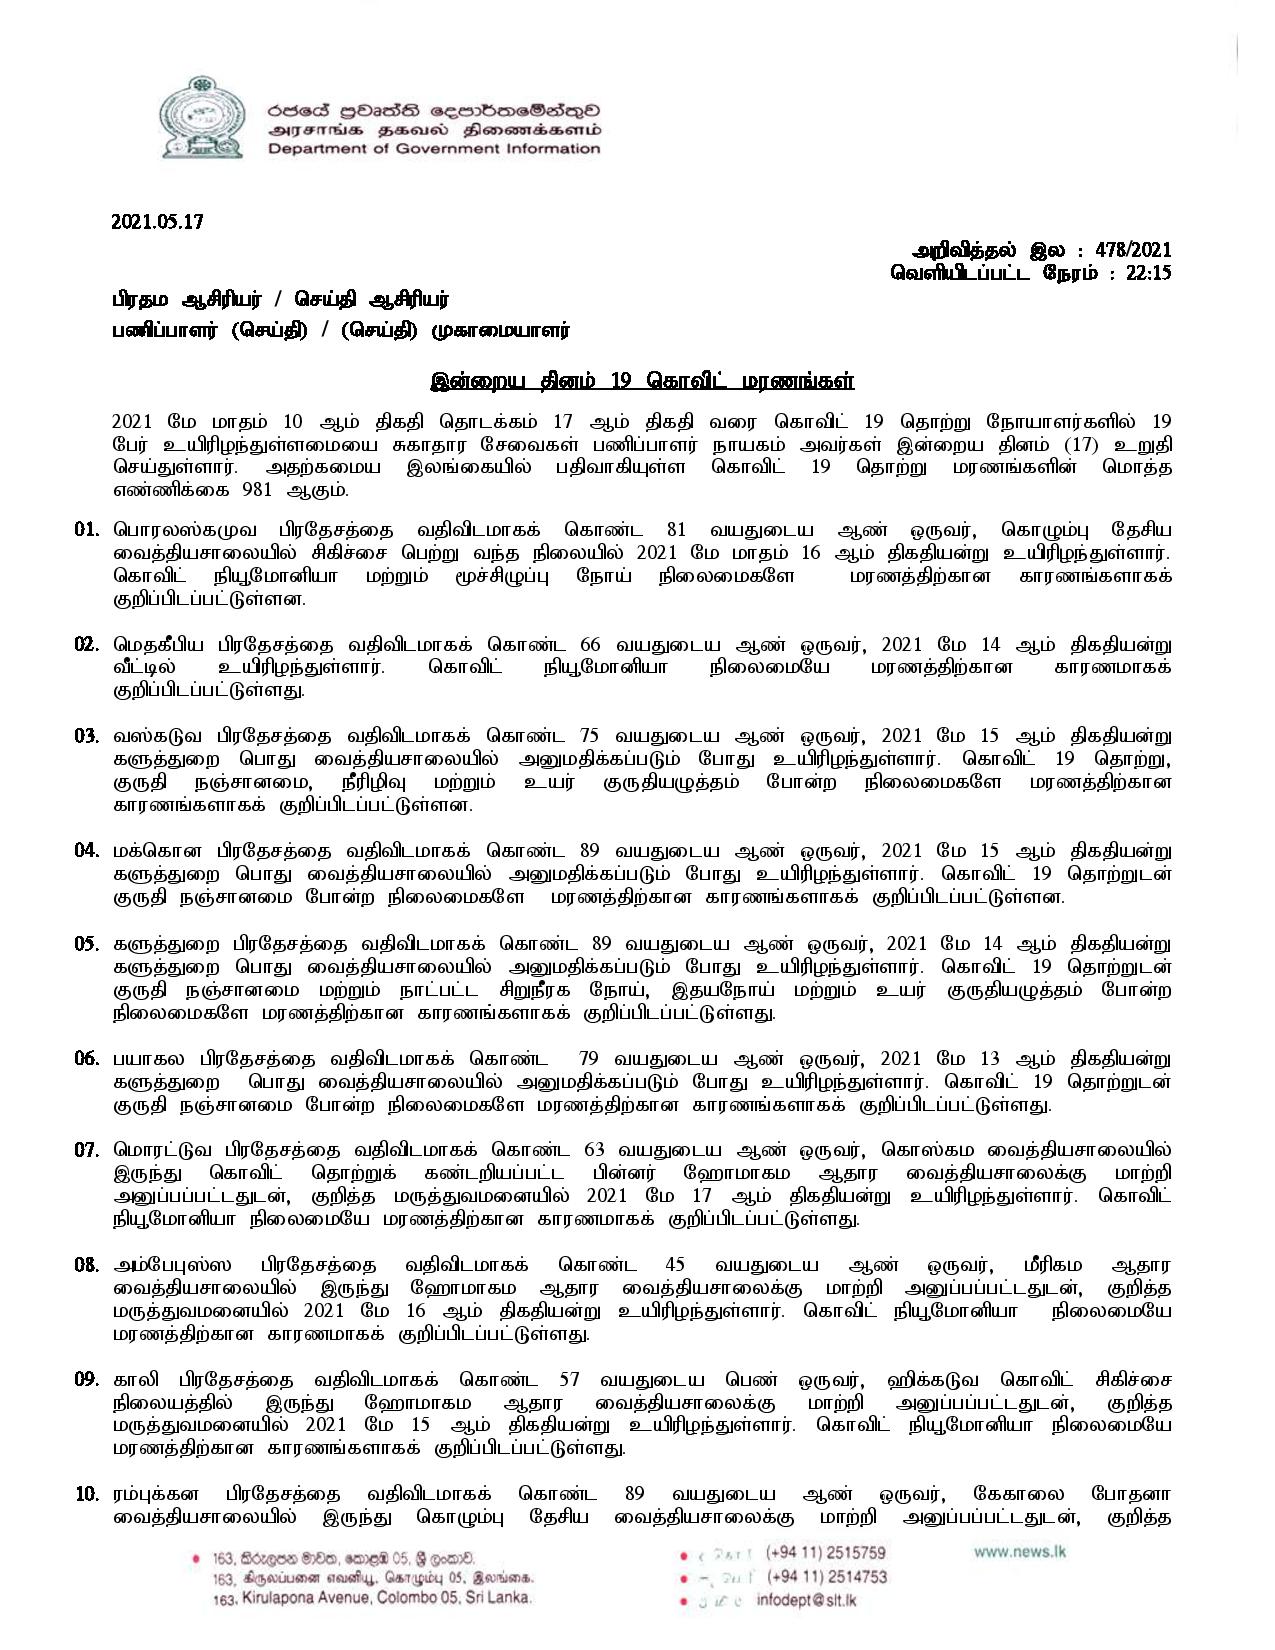 Release No 478 Tamil page 001